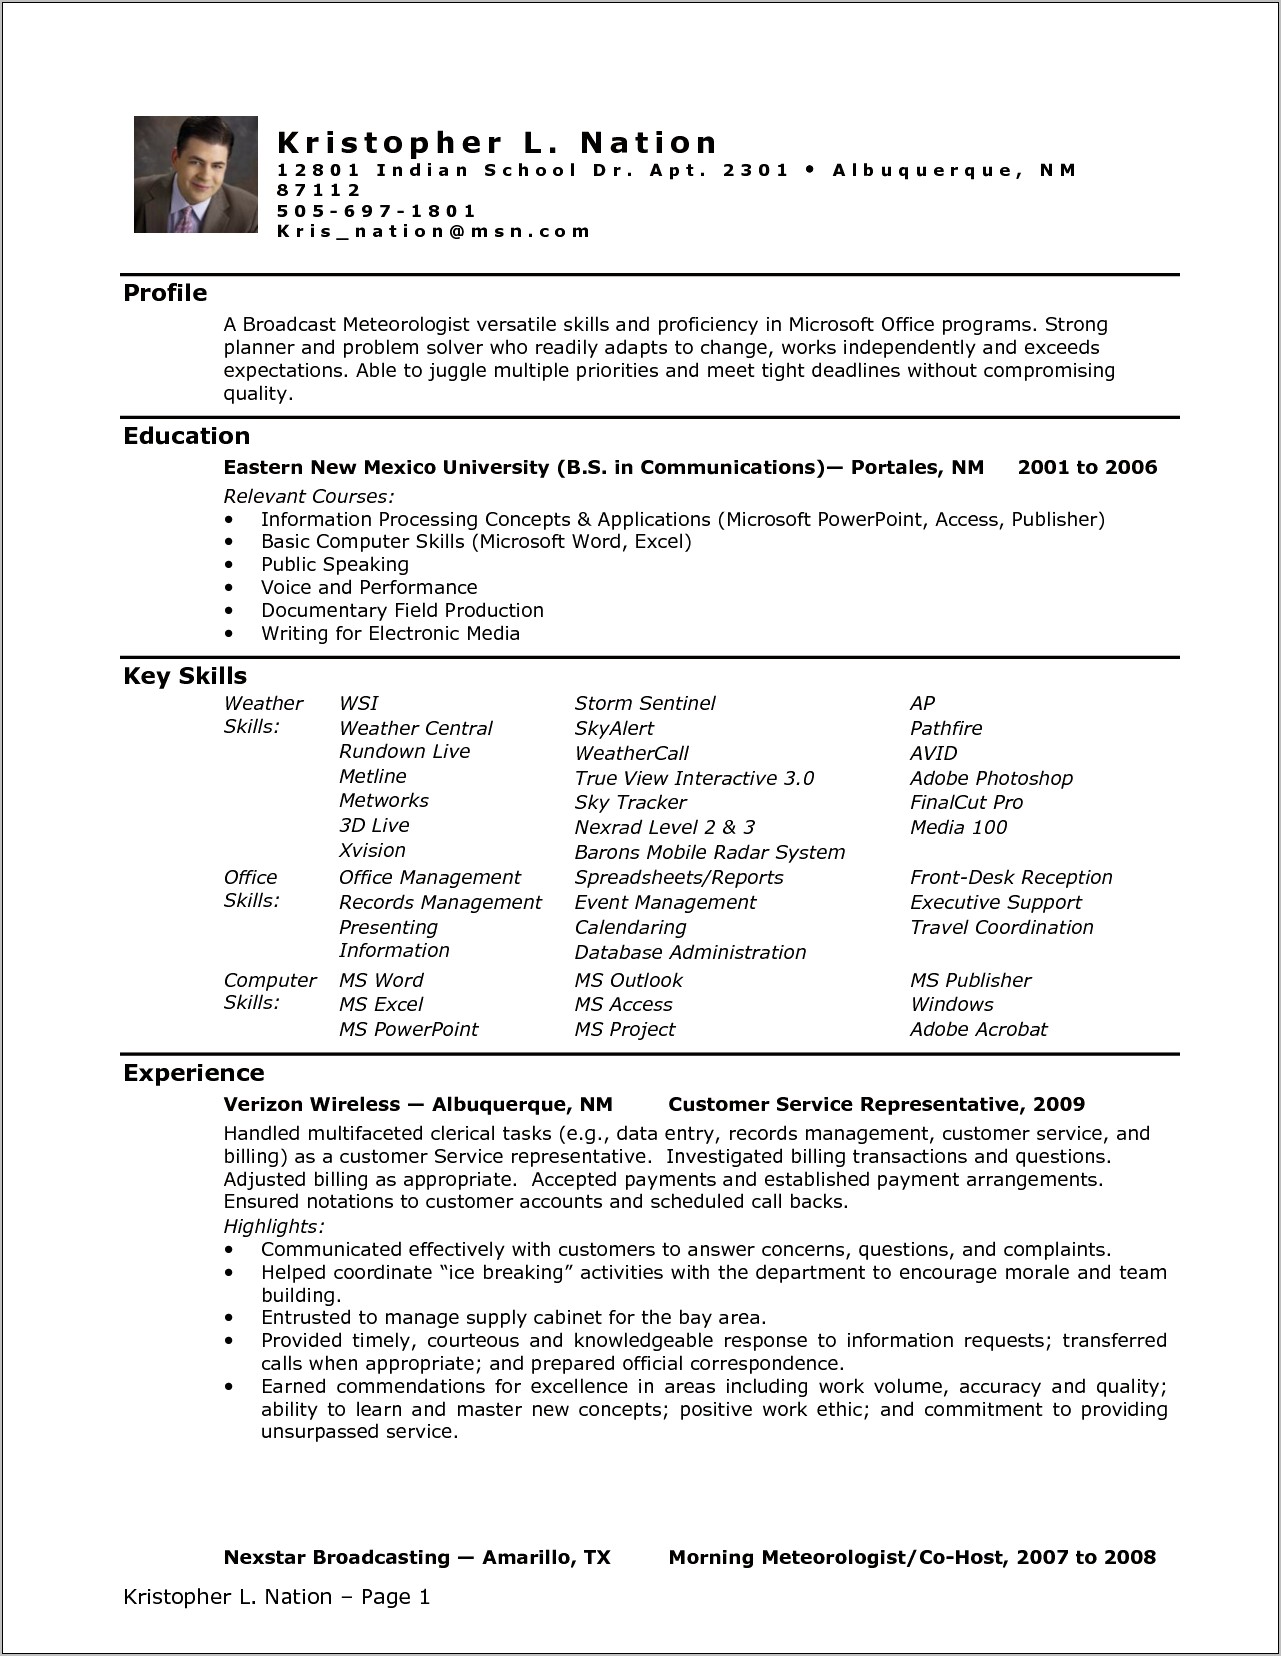 Examples Of Basic Computer Skills For Resume